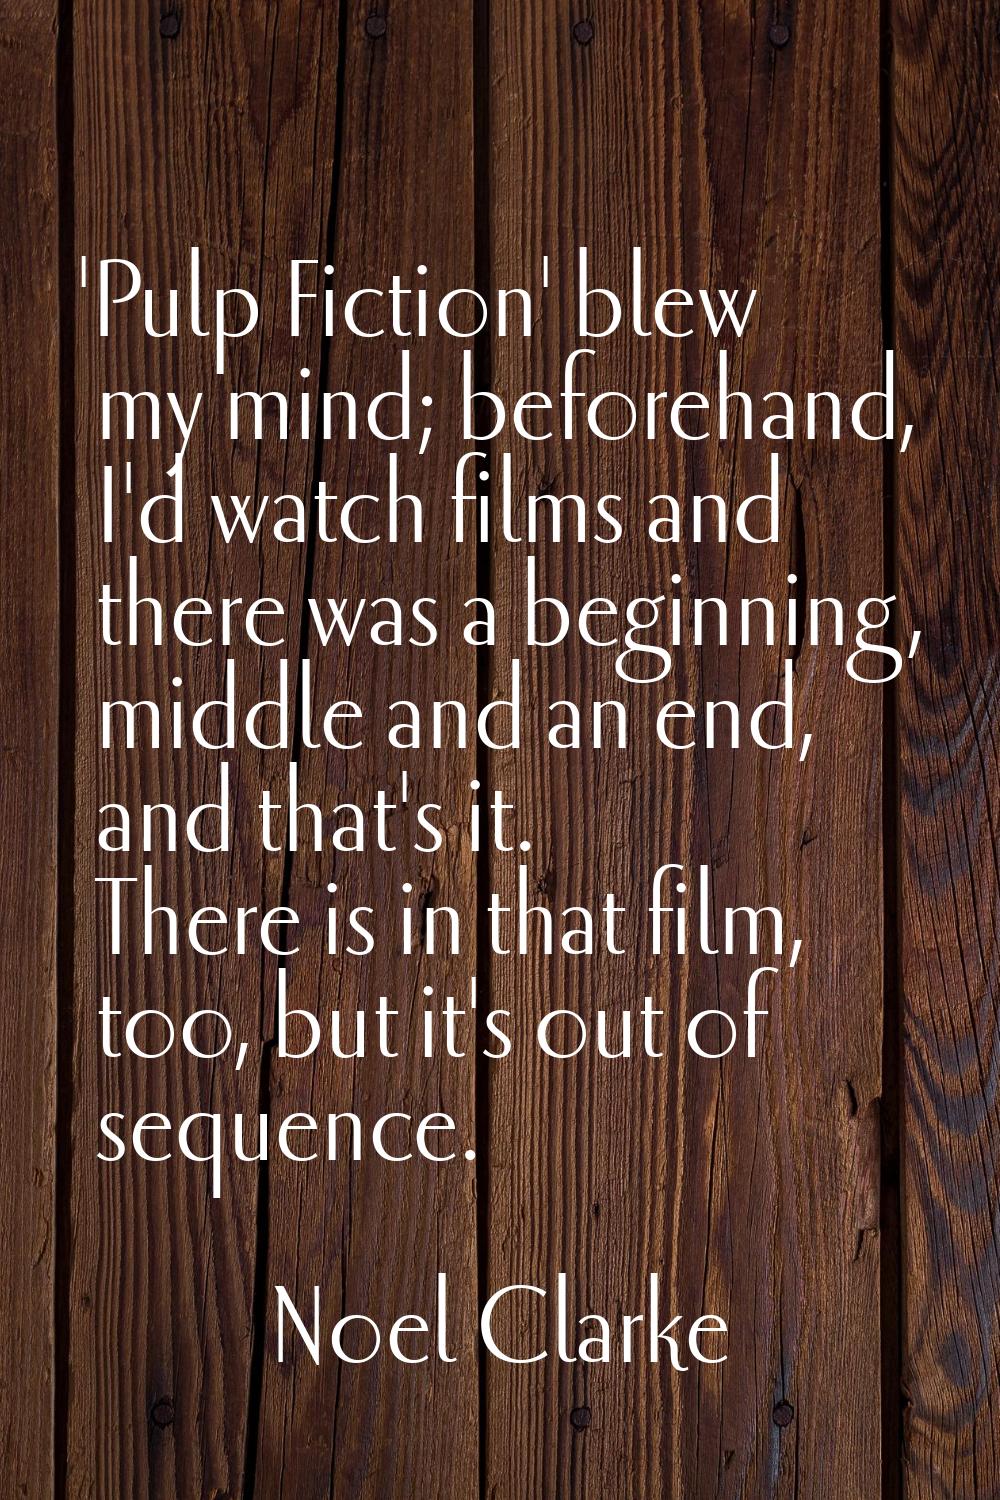 'Pulp Fiction' blew my mind; beforehand, I'd watch films and there was a beginning, middle and an e